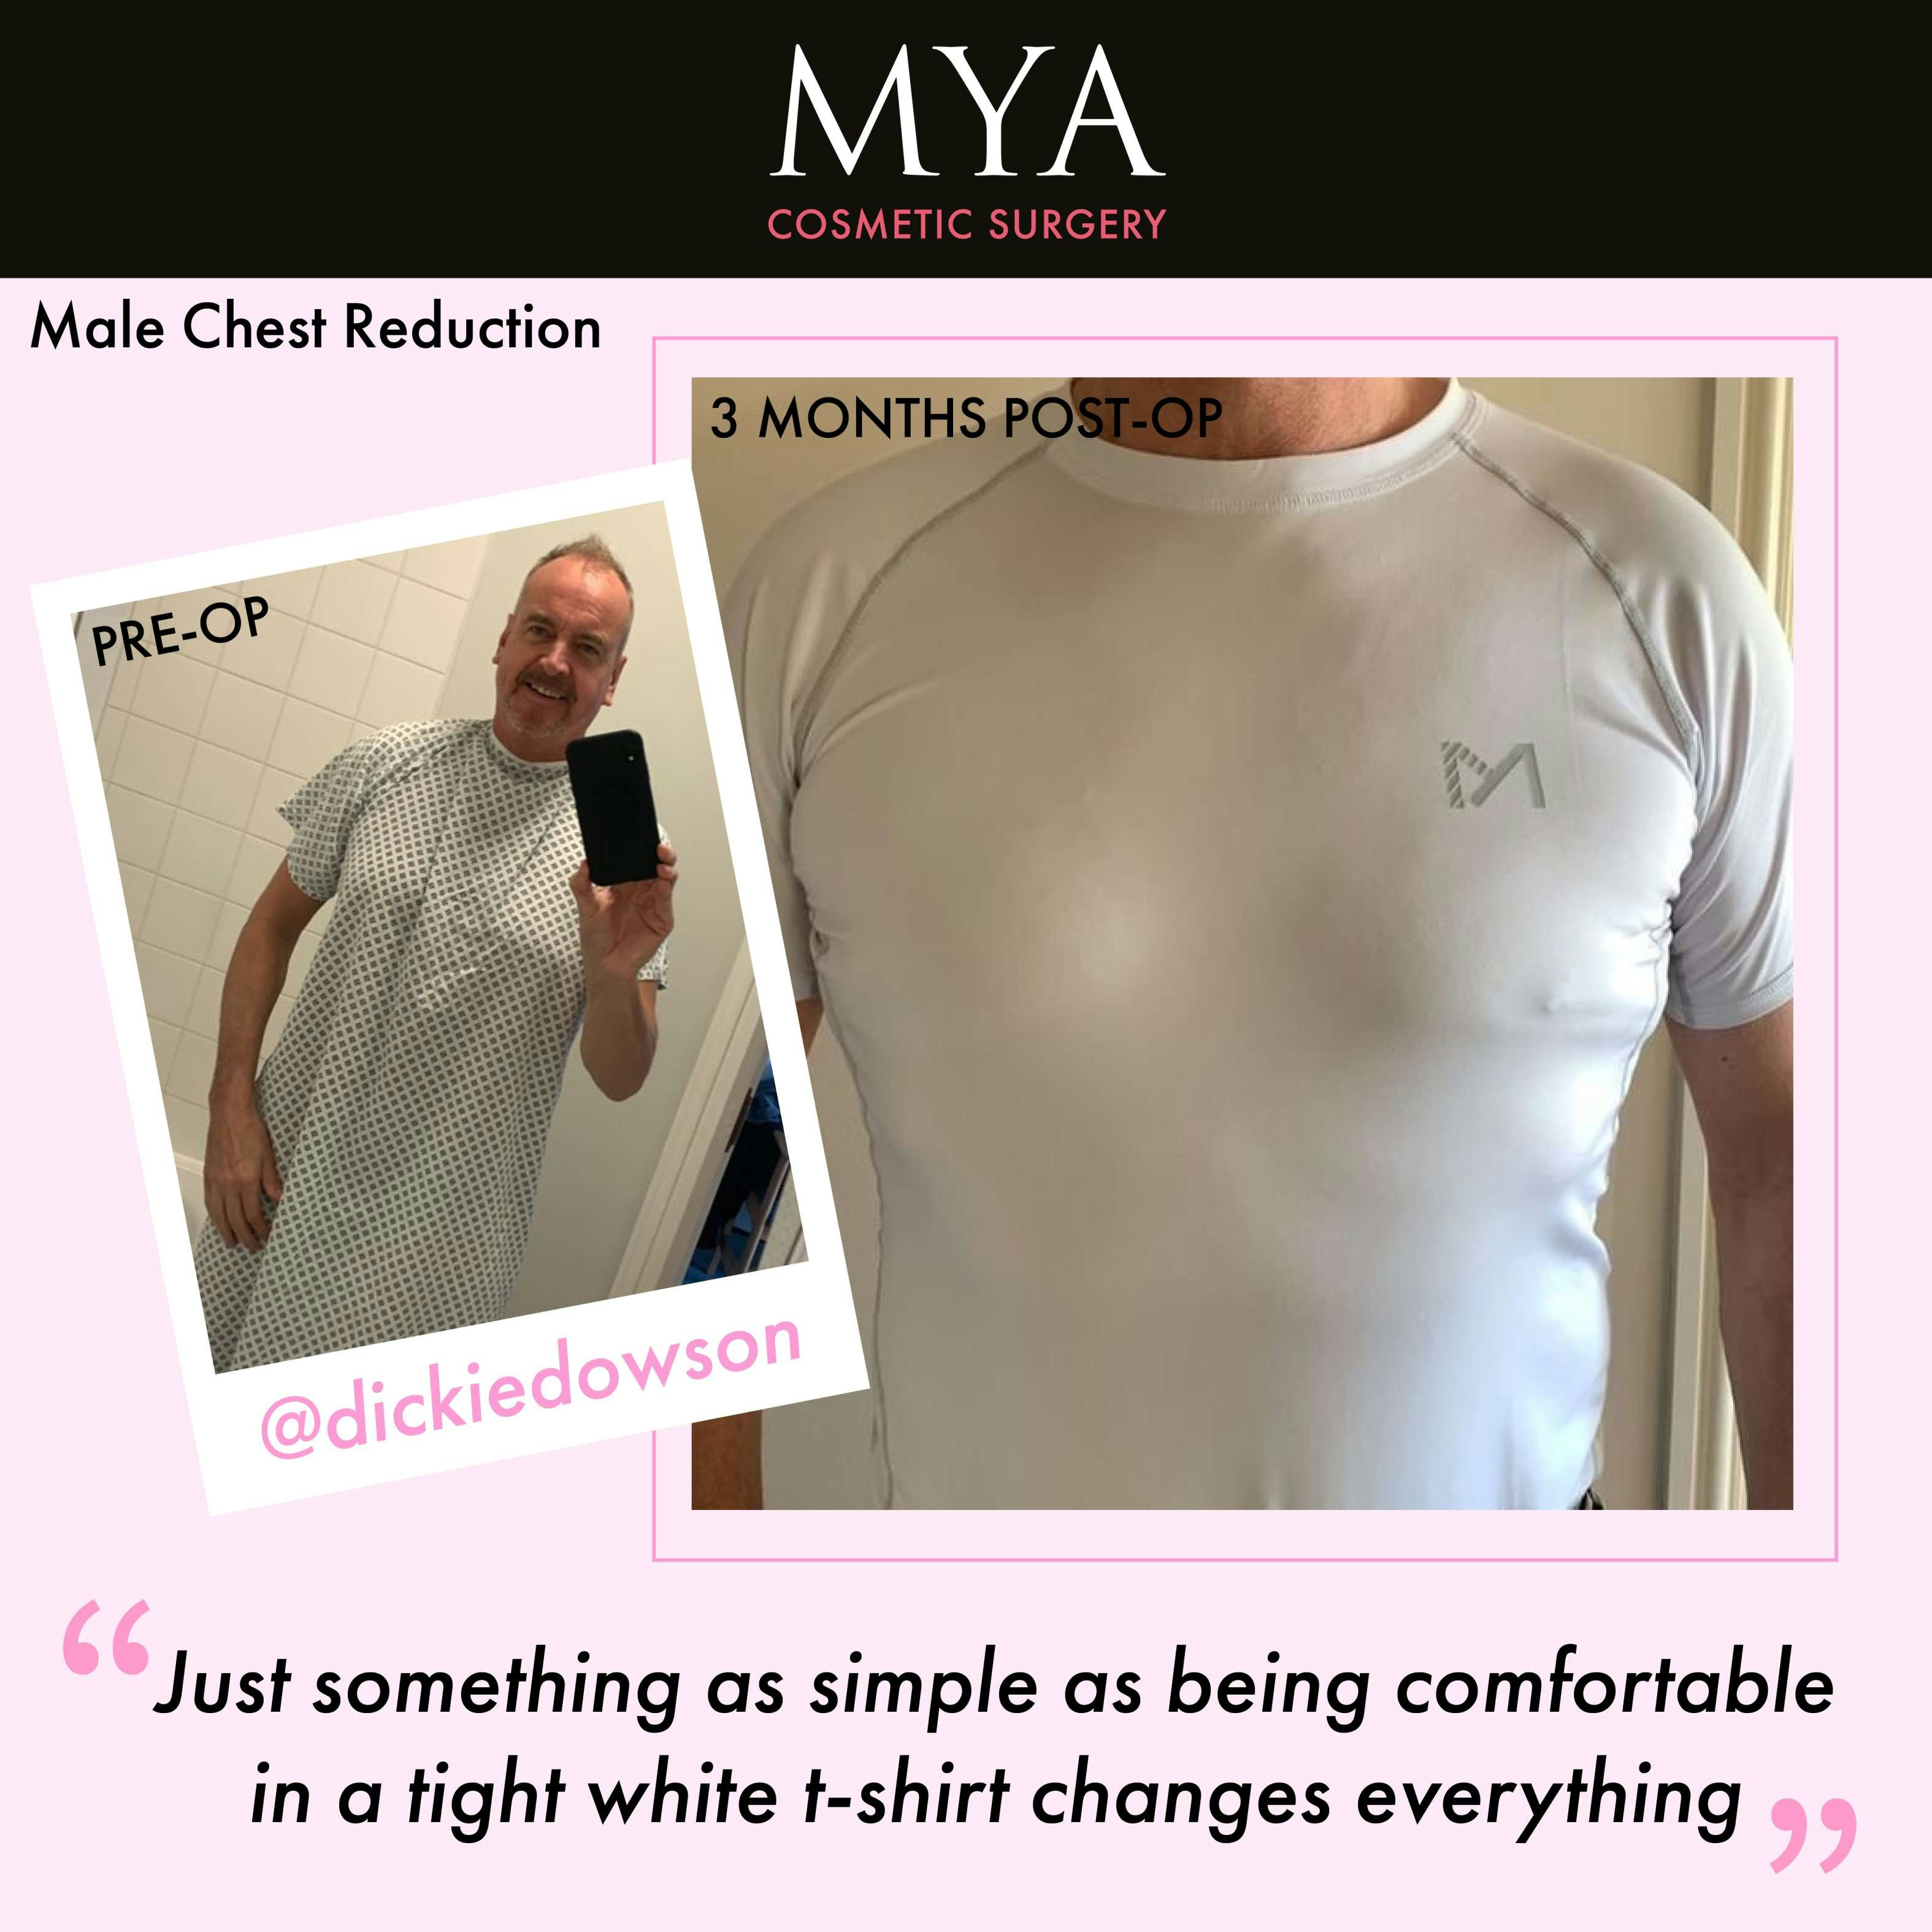 Male Chest Reduction Before and After